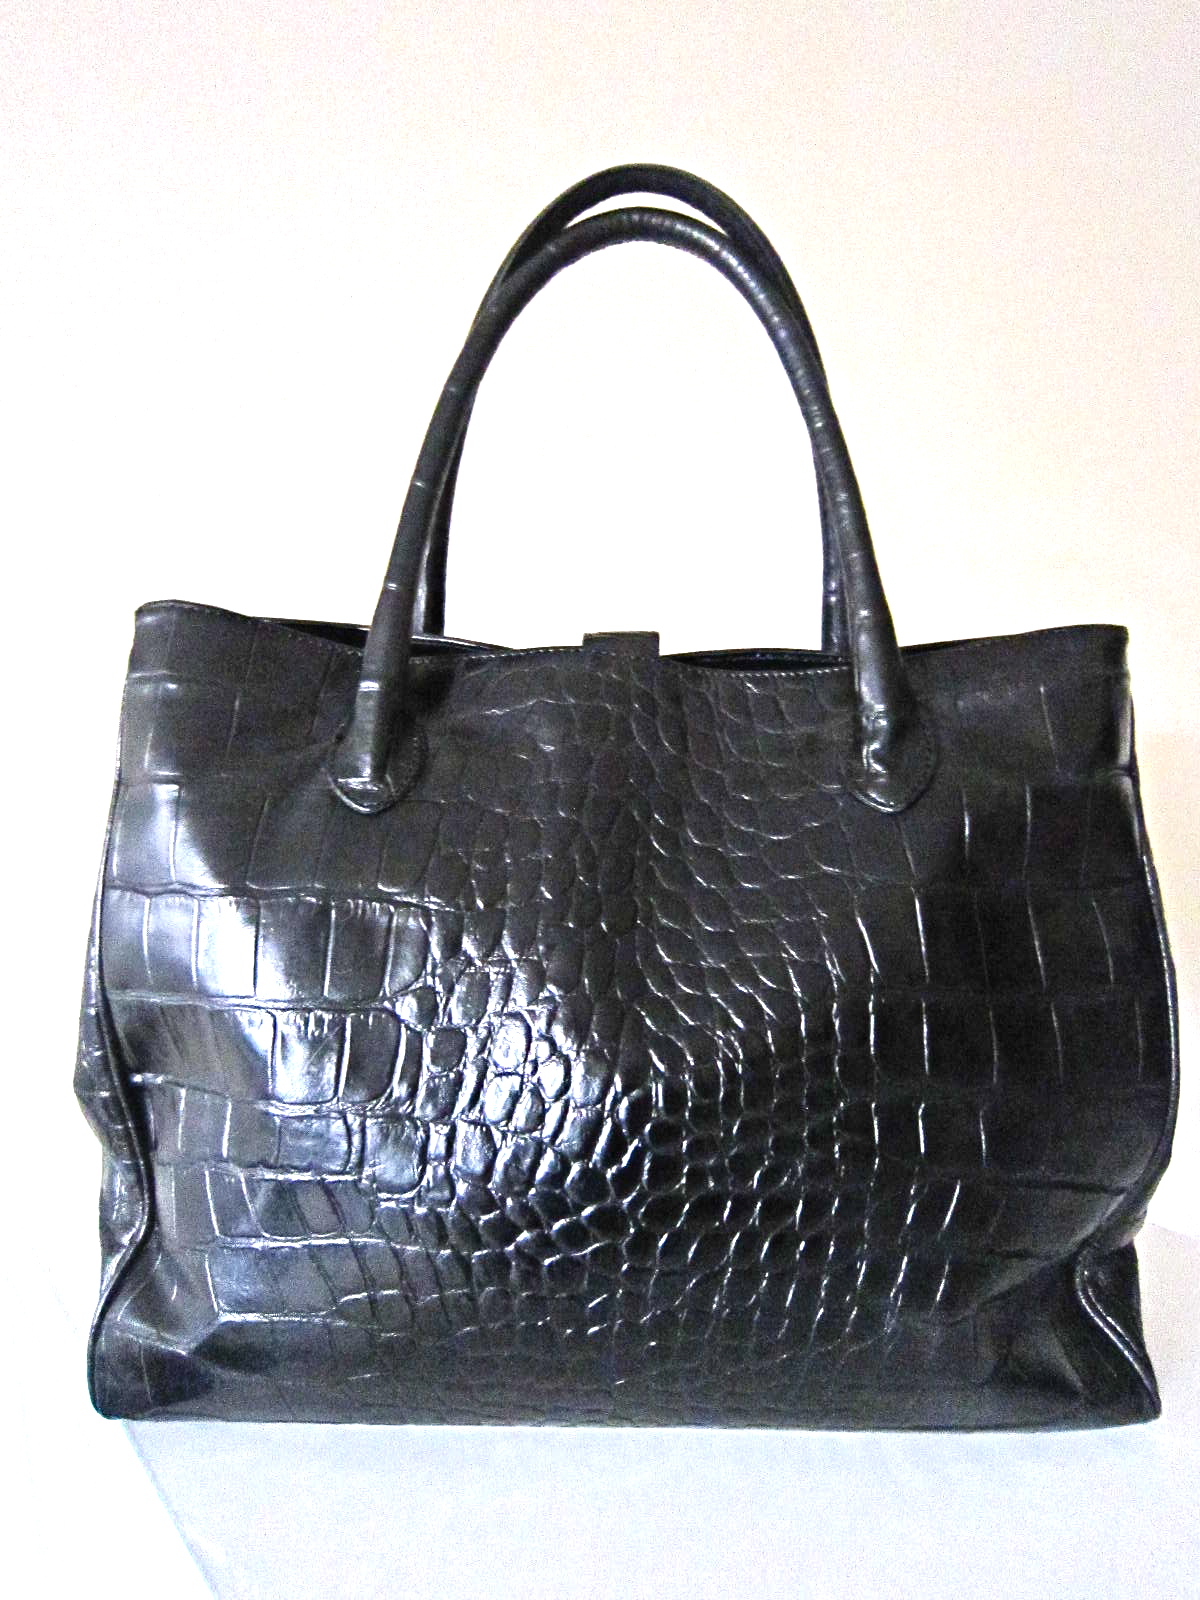 Browns Couture Black Croc Leather Tote